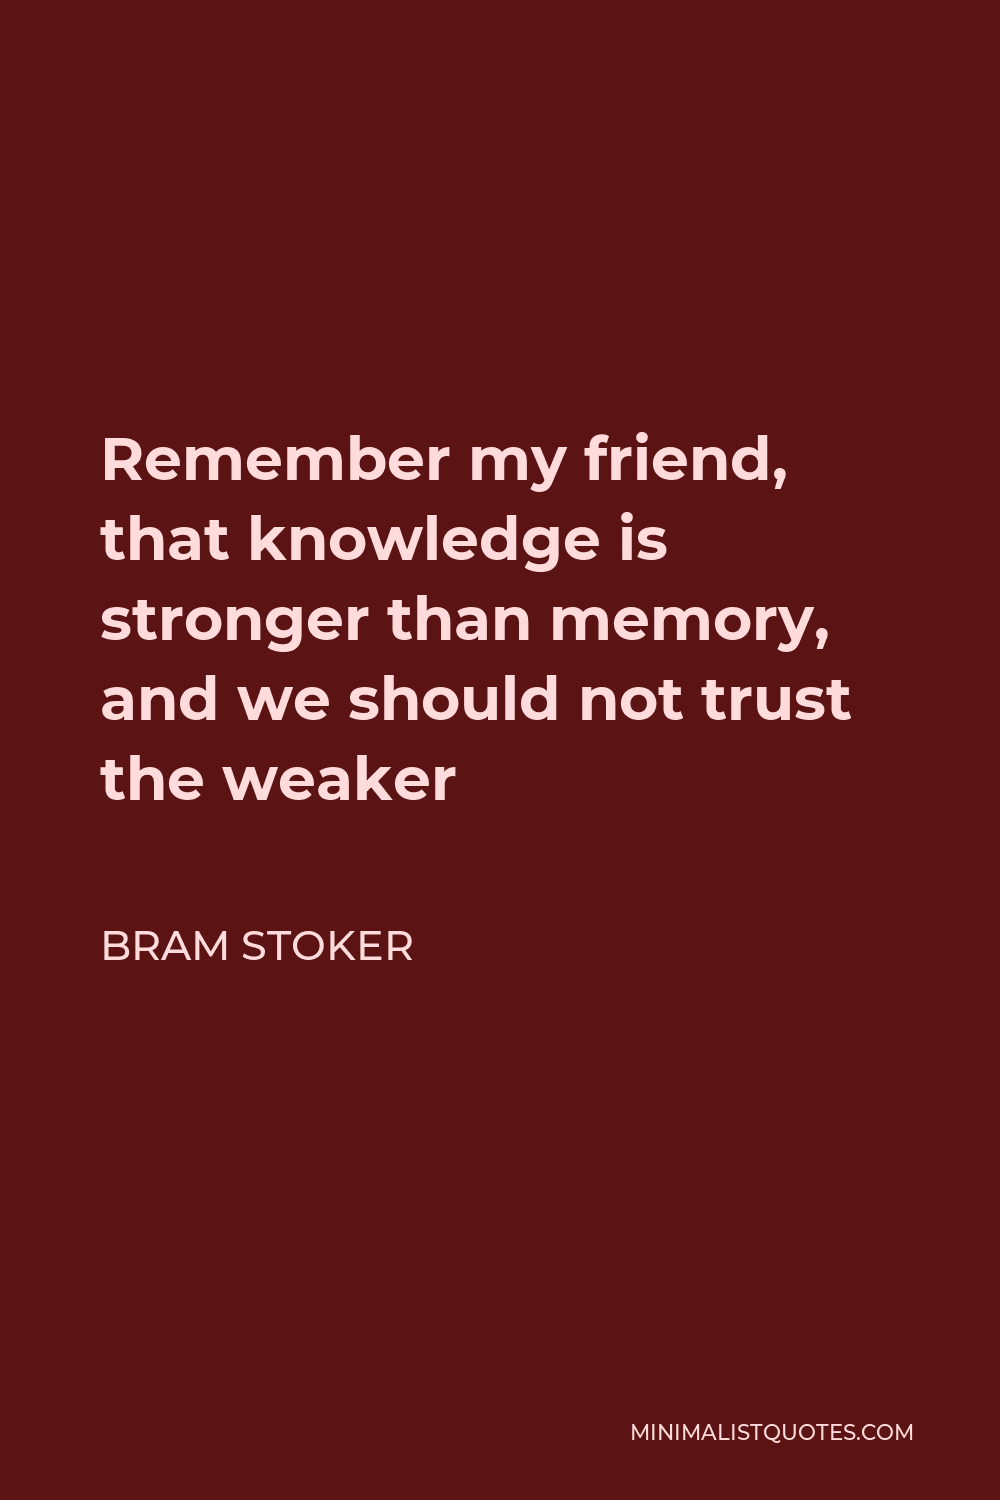 Bram Stoker Quote - Remember my friend, that knowledge is stronger than memory, and we should not trust the weaker